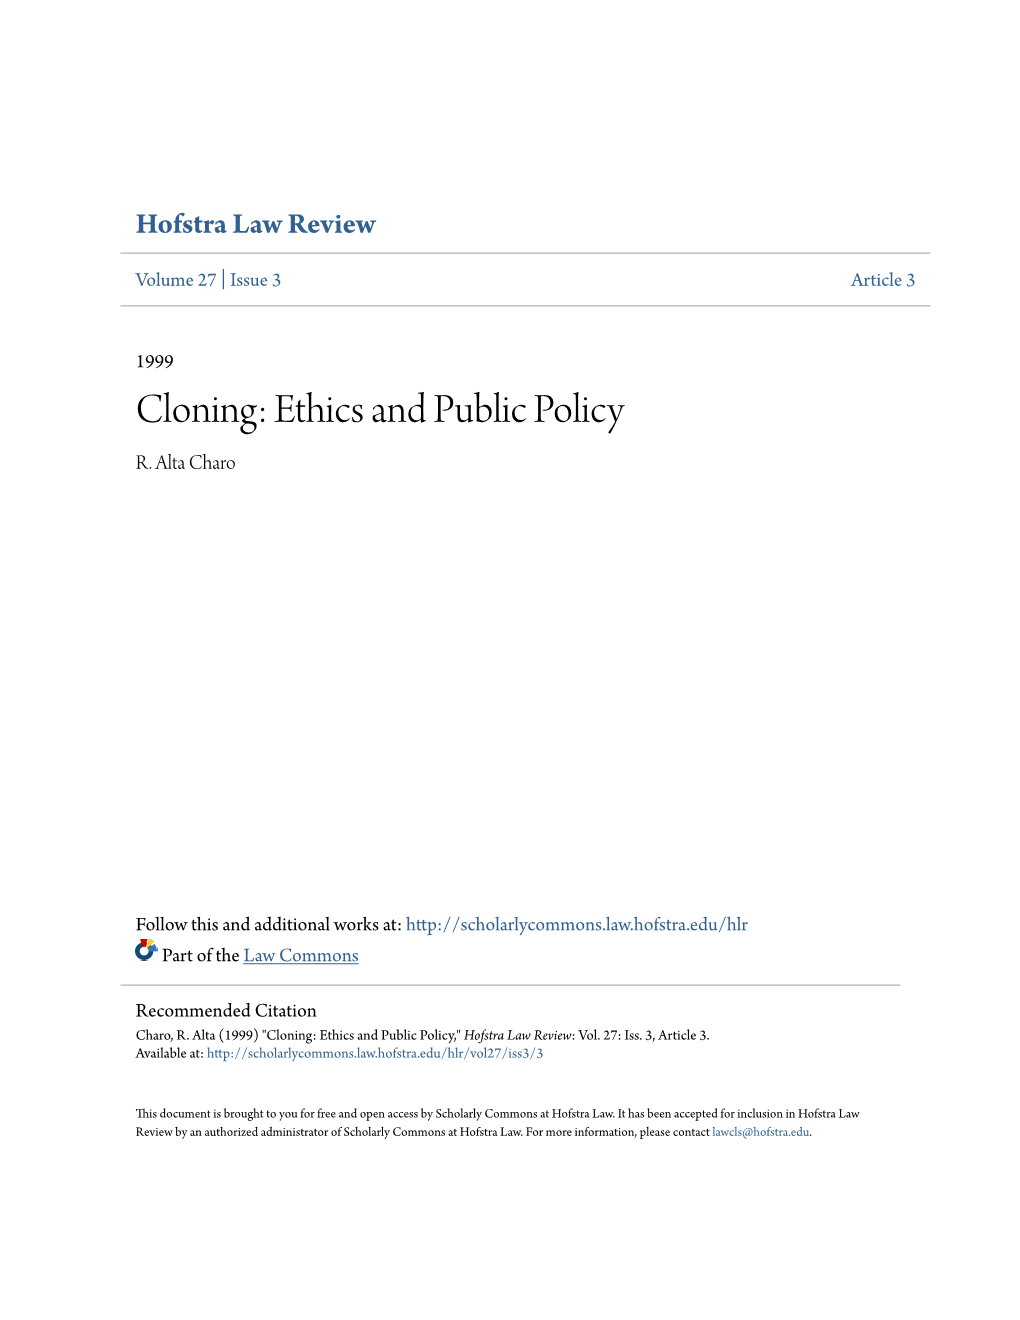 Cloning: Ethics and Public Policy R